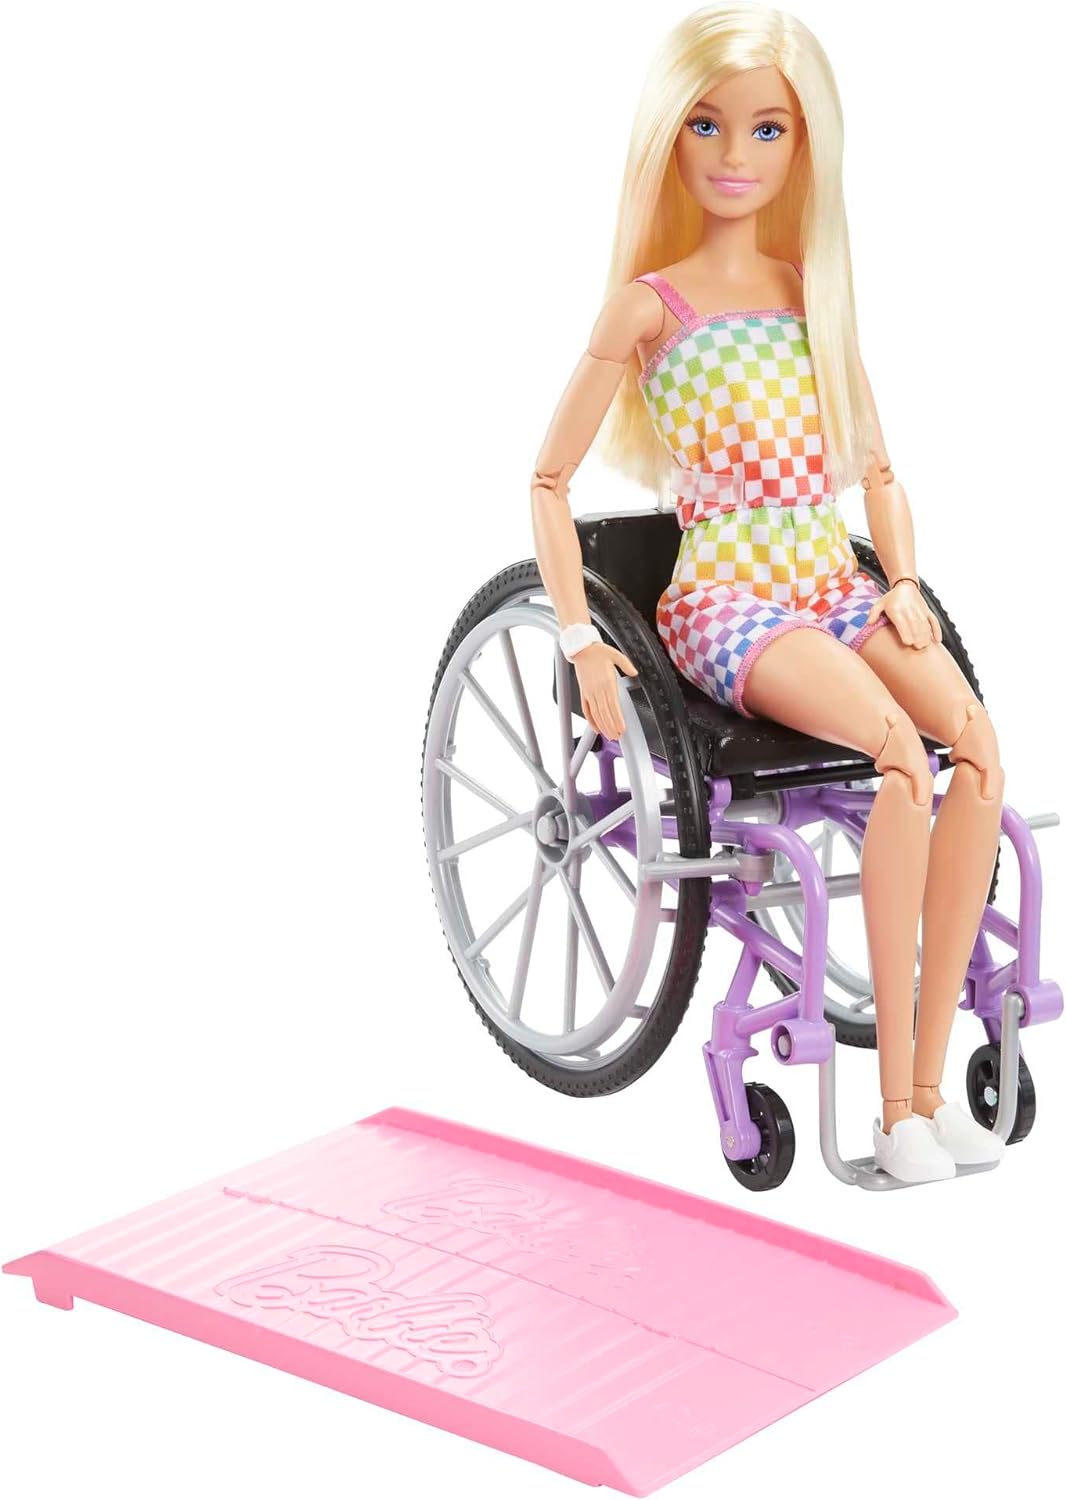 Barbie Doll with Wheelchair and Ramp, Kids Toys, Blonde, Barbie Fashionistas, Rainbow Romper, Clothes and Accessories